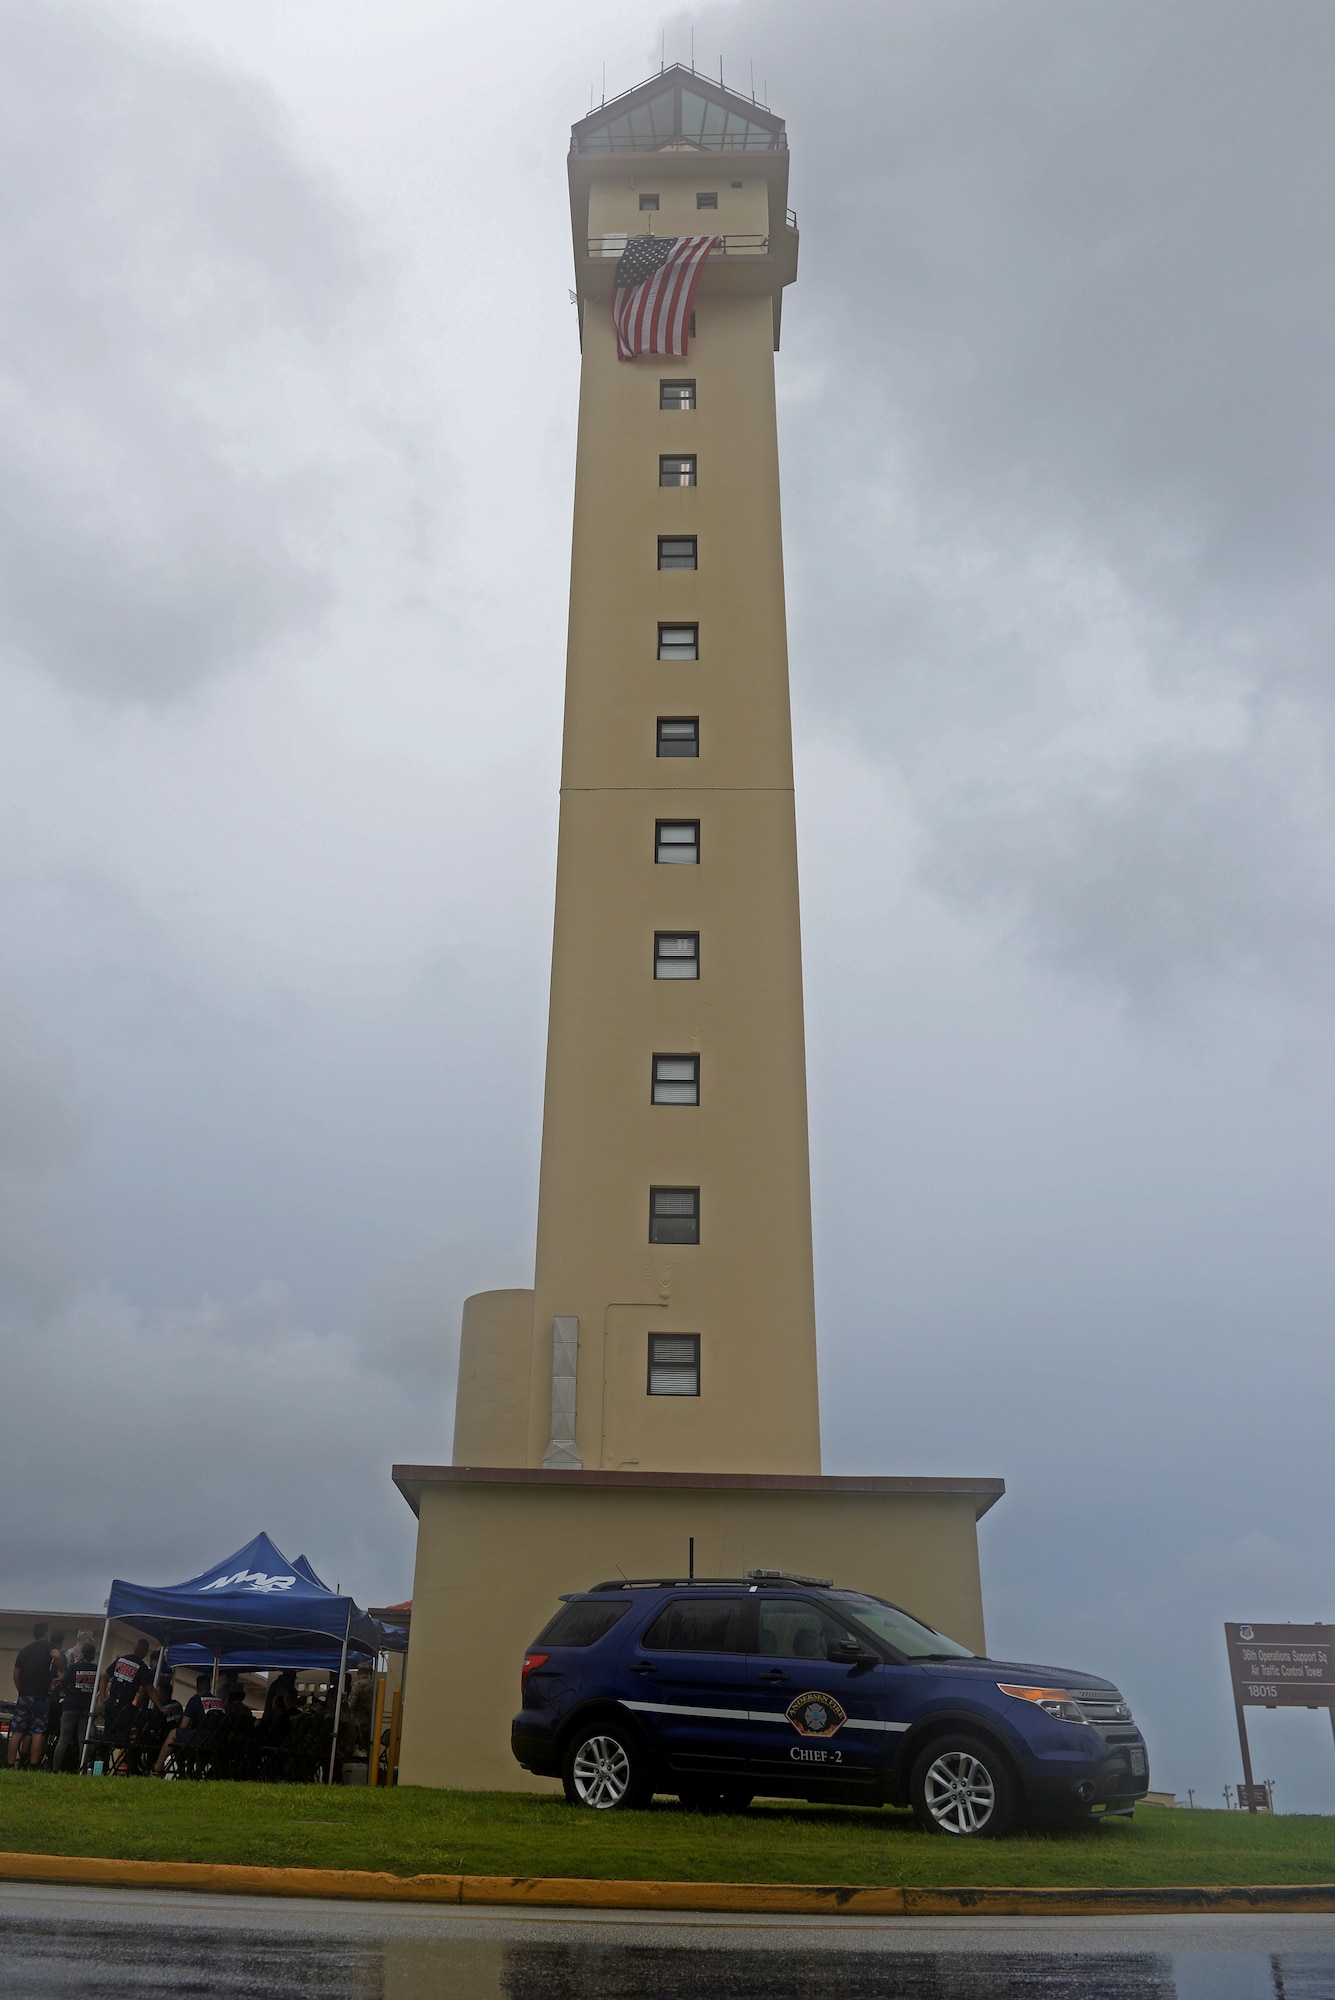 A U.S. flag is flown on the 36th Operation Support Squadron air traffic control tower during a September 11 memorial stair climb event on Andersen Air Force Base, Guam, Sept. 11, 2019.